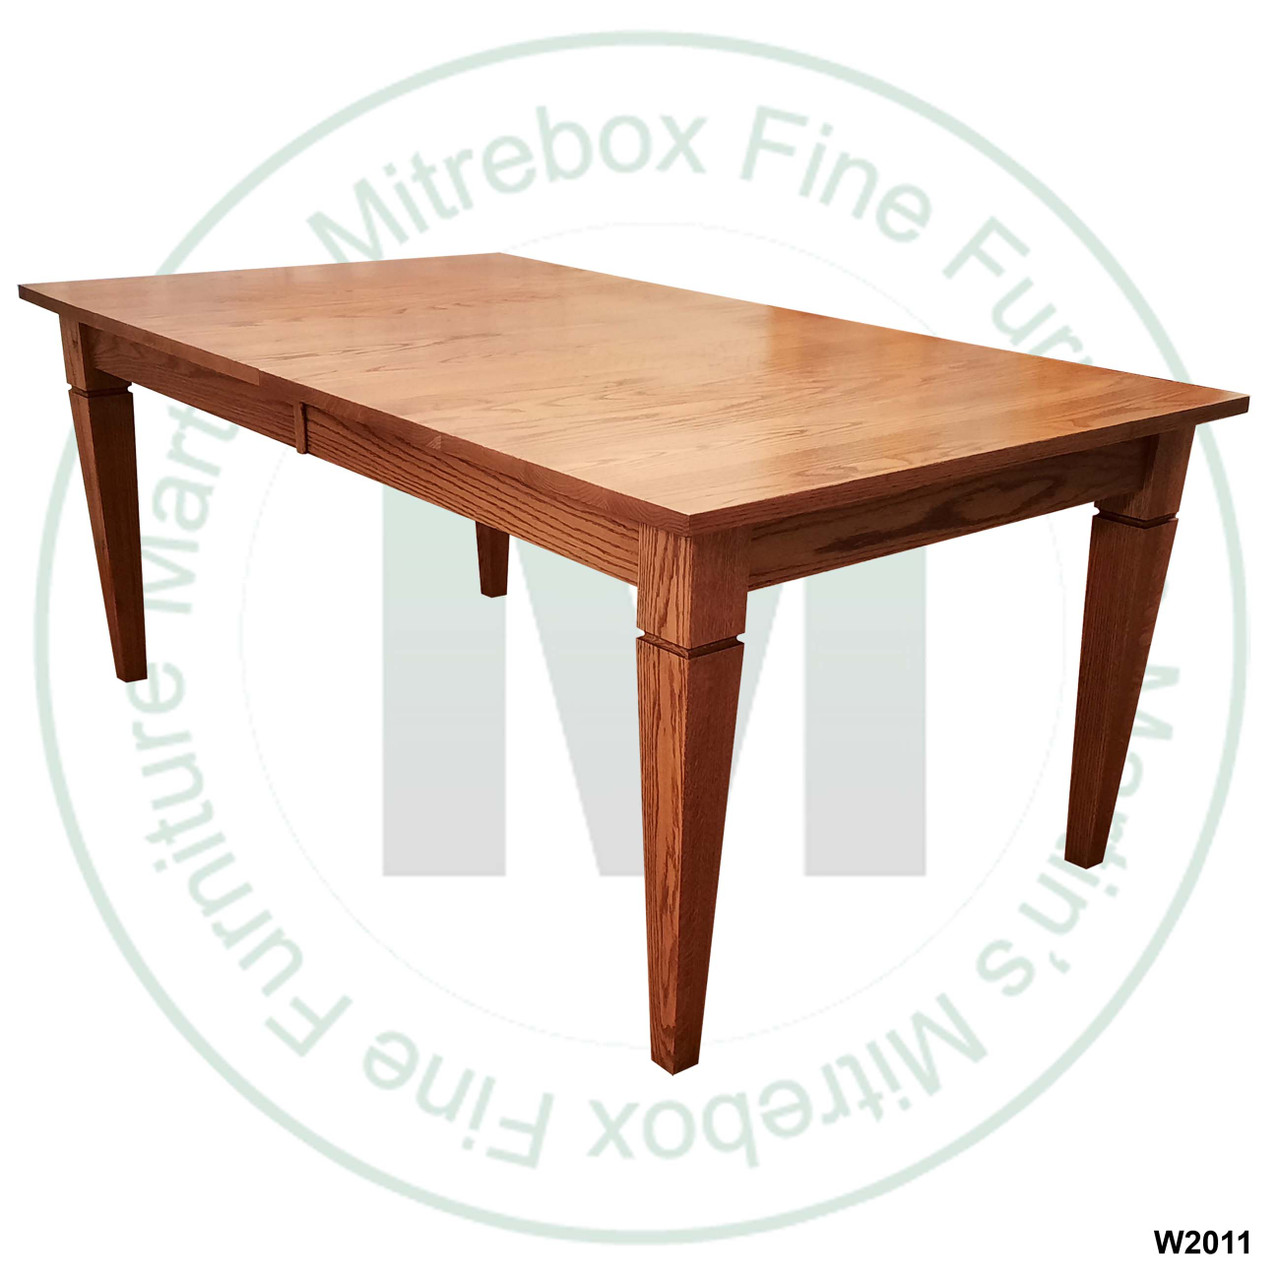 Oak Reesor Solid Top Harvest Table 36''D x 48''W x 30''H Table Has 1 3/4'' Thick Top